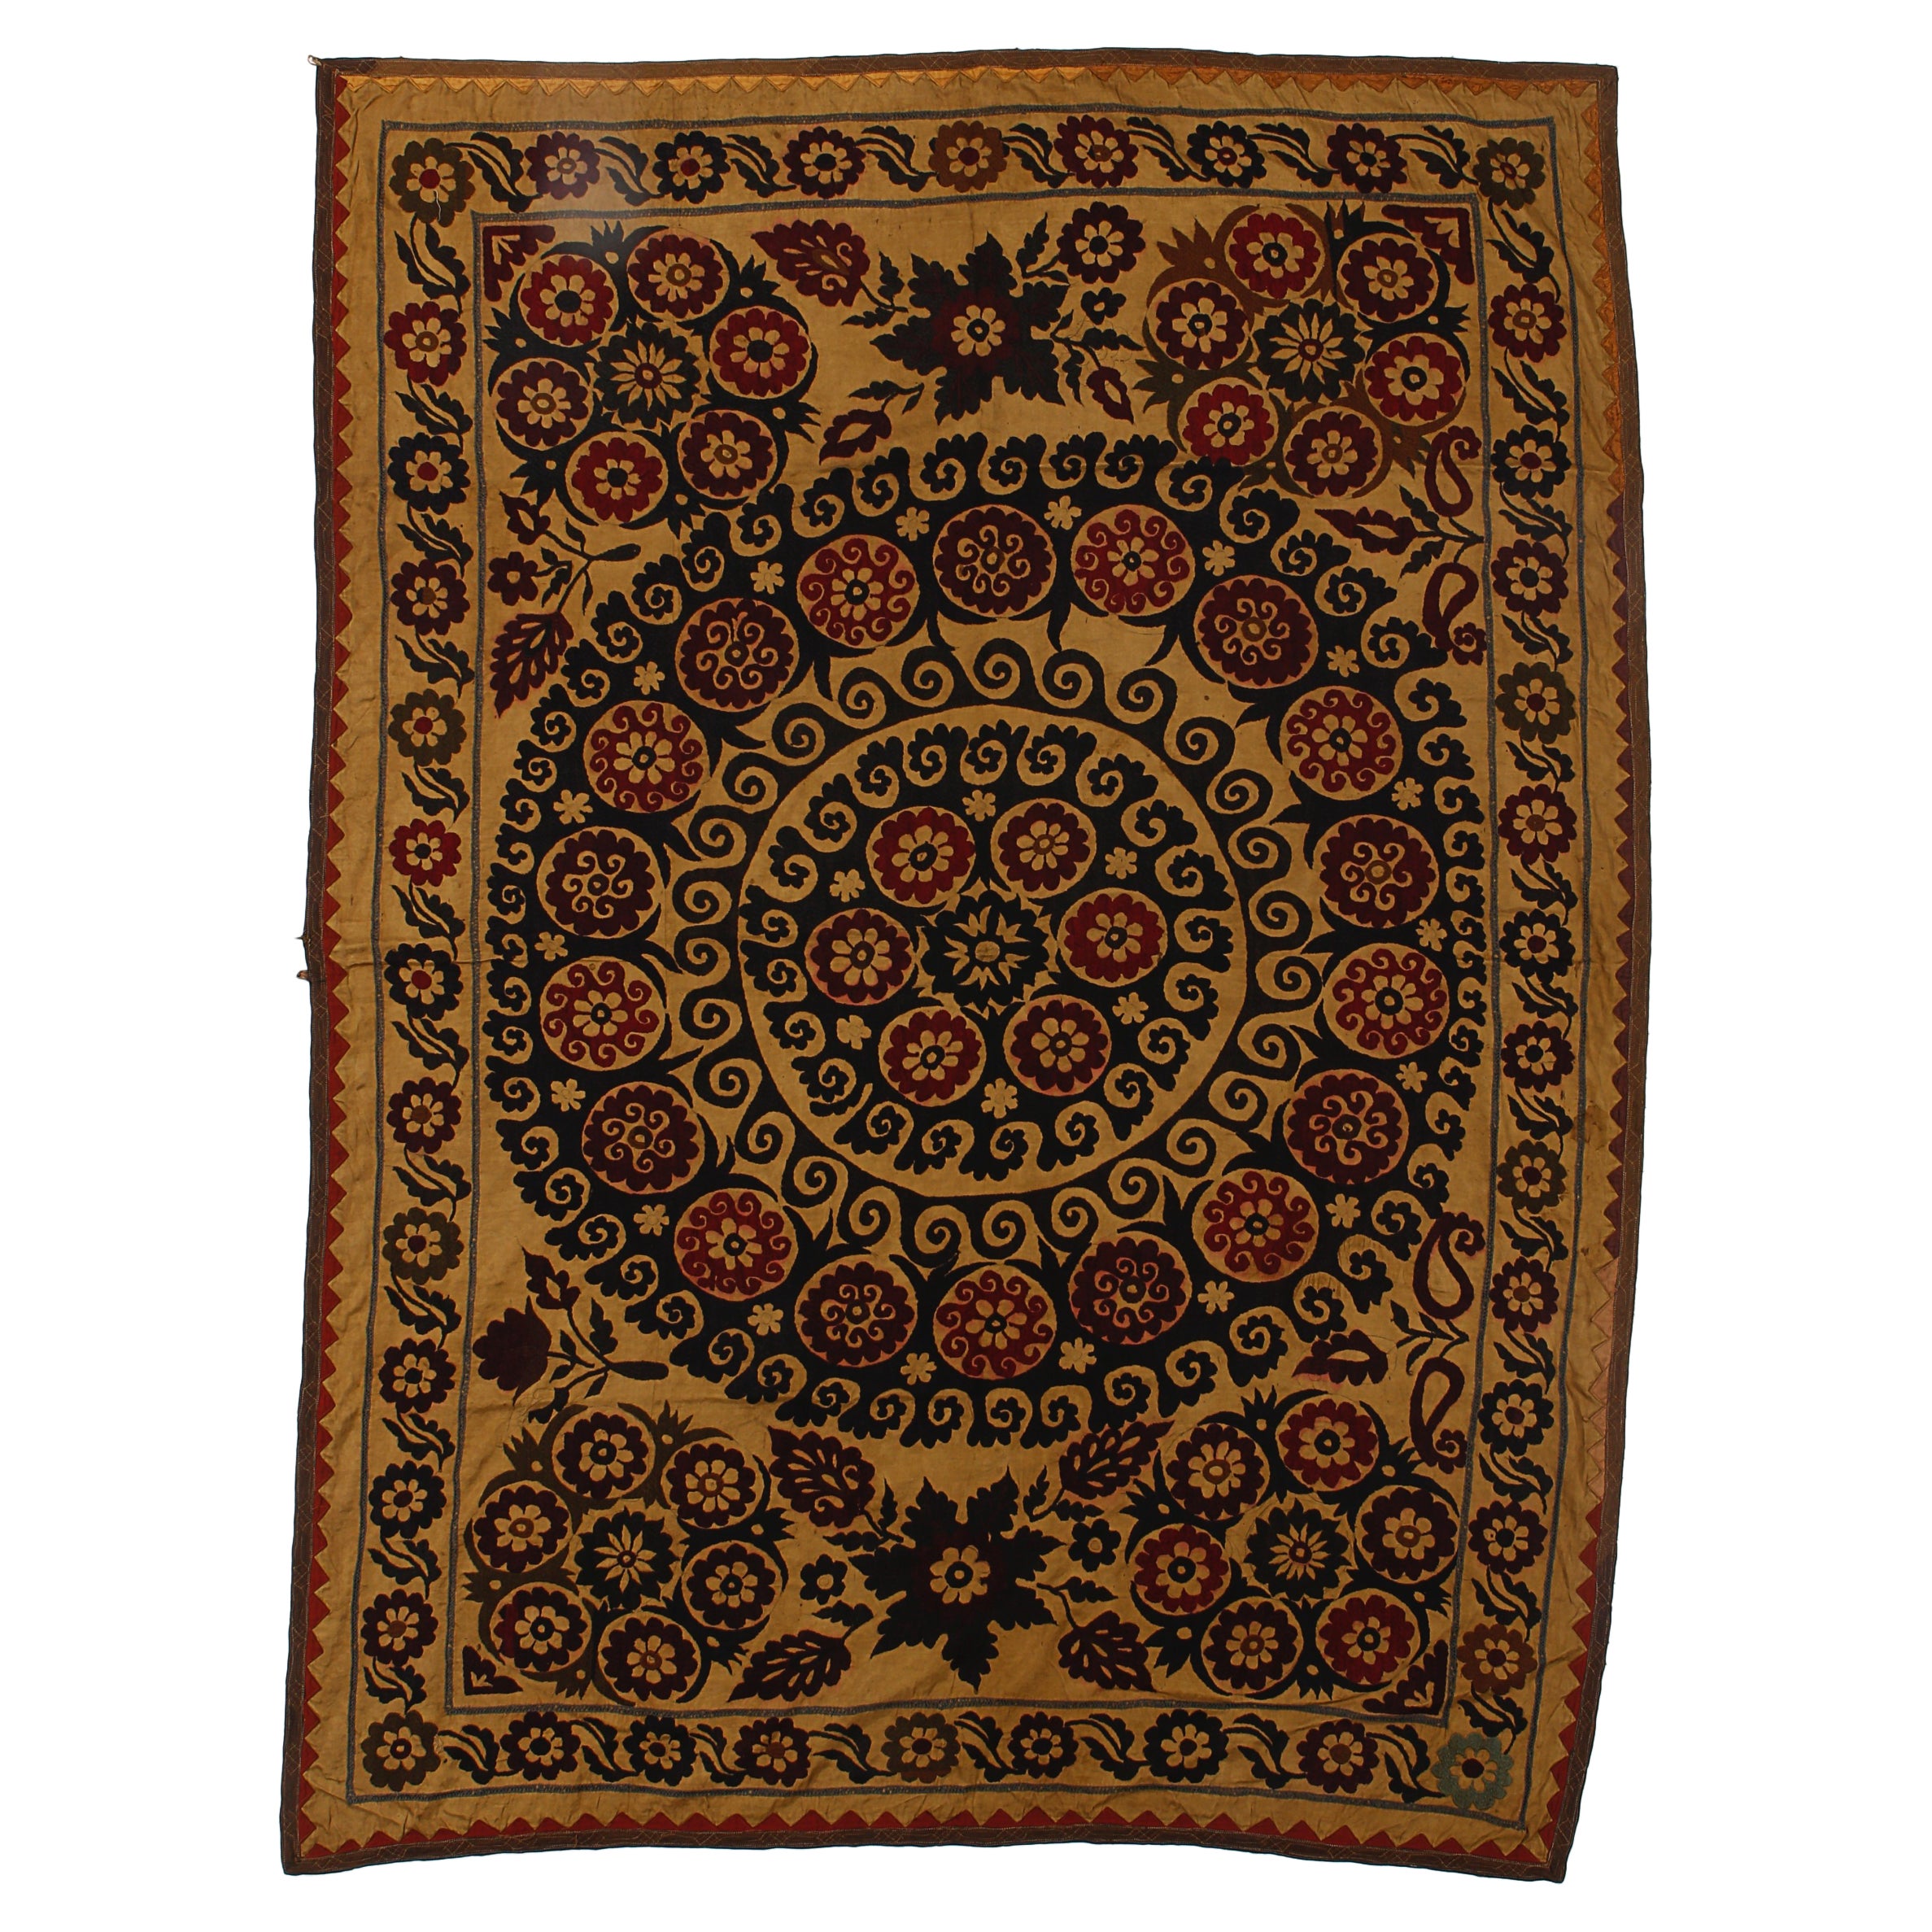 Fine Embroidery "Suzani" Wall Hanging, Uzbek Silk and Cotton Bed Cover 4.5x6 Ft.